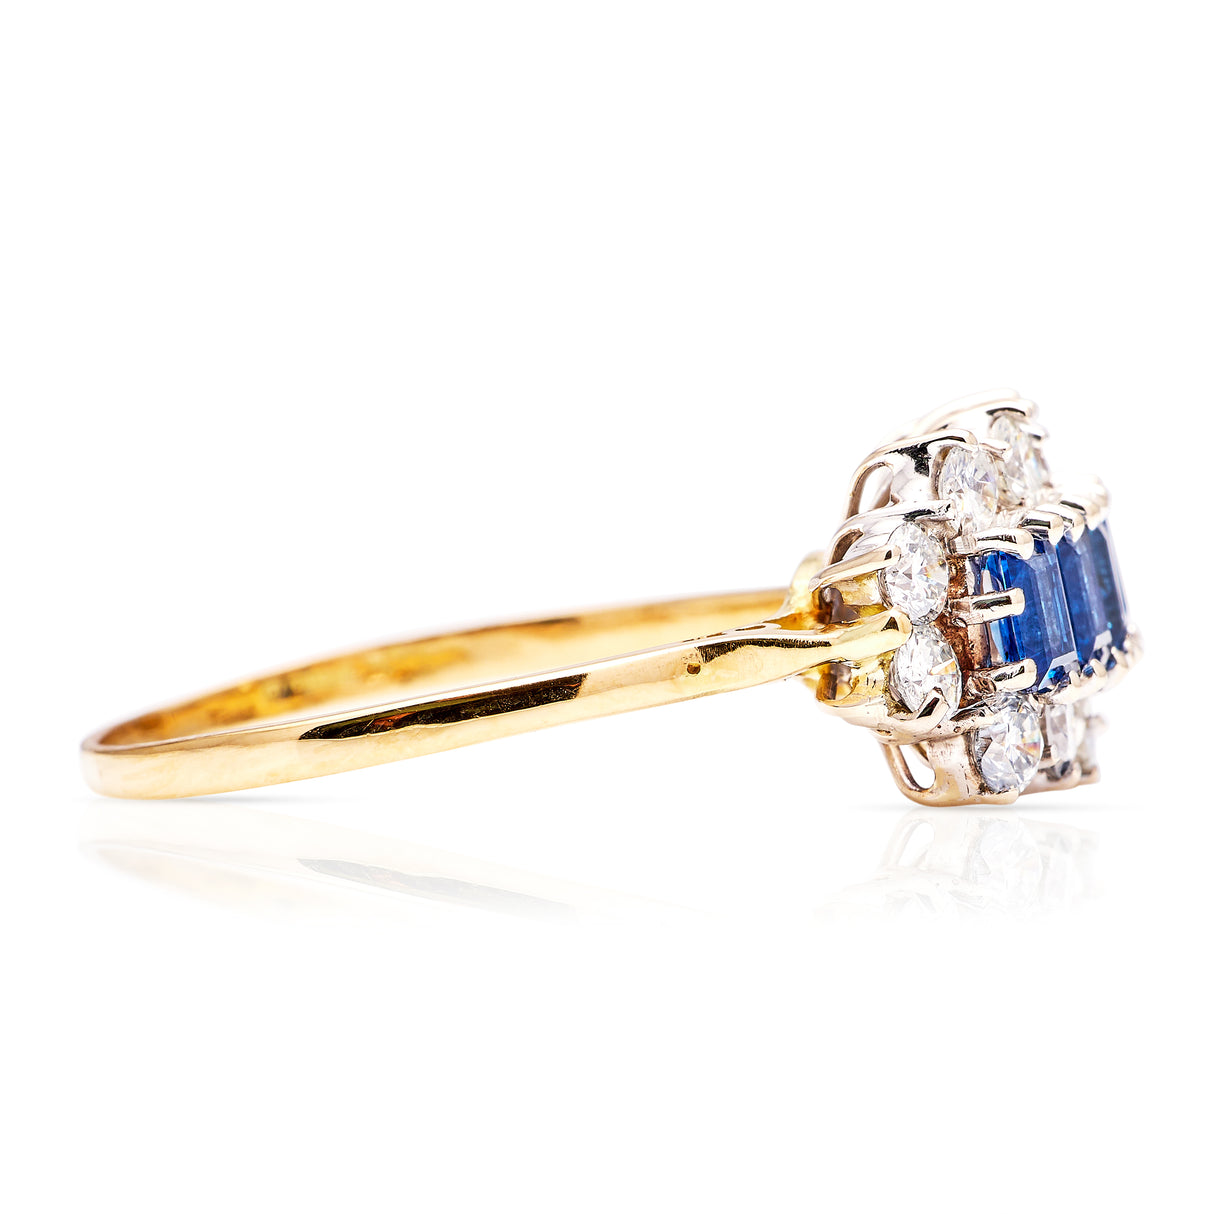 Vintage, 1950s sapphire and diamond cocktail ring, 18ct yellow gold and platinum